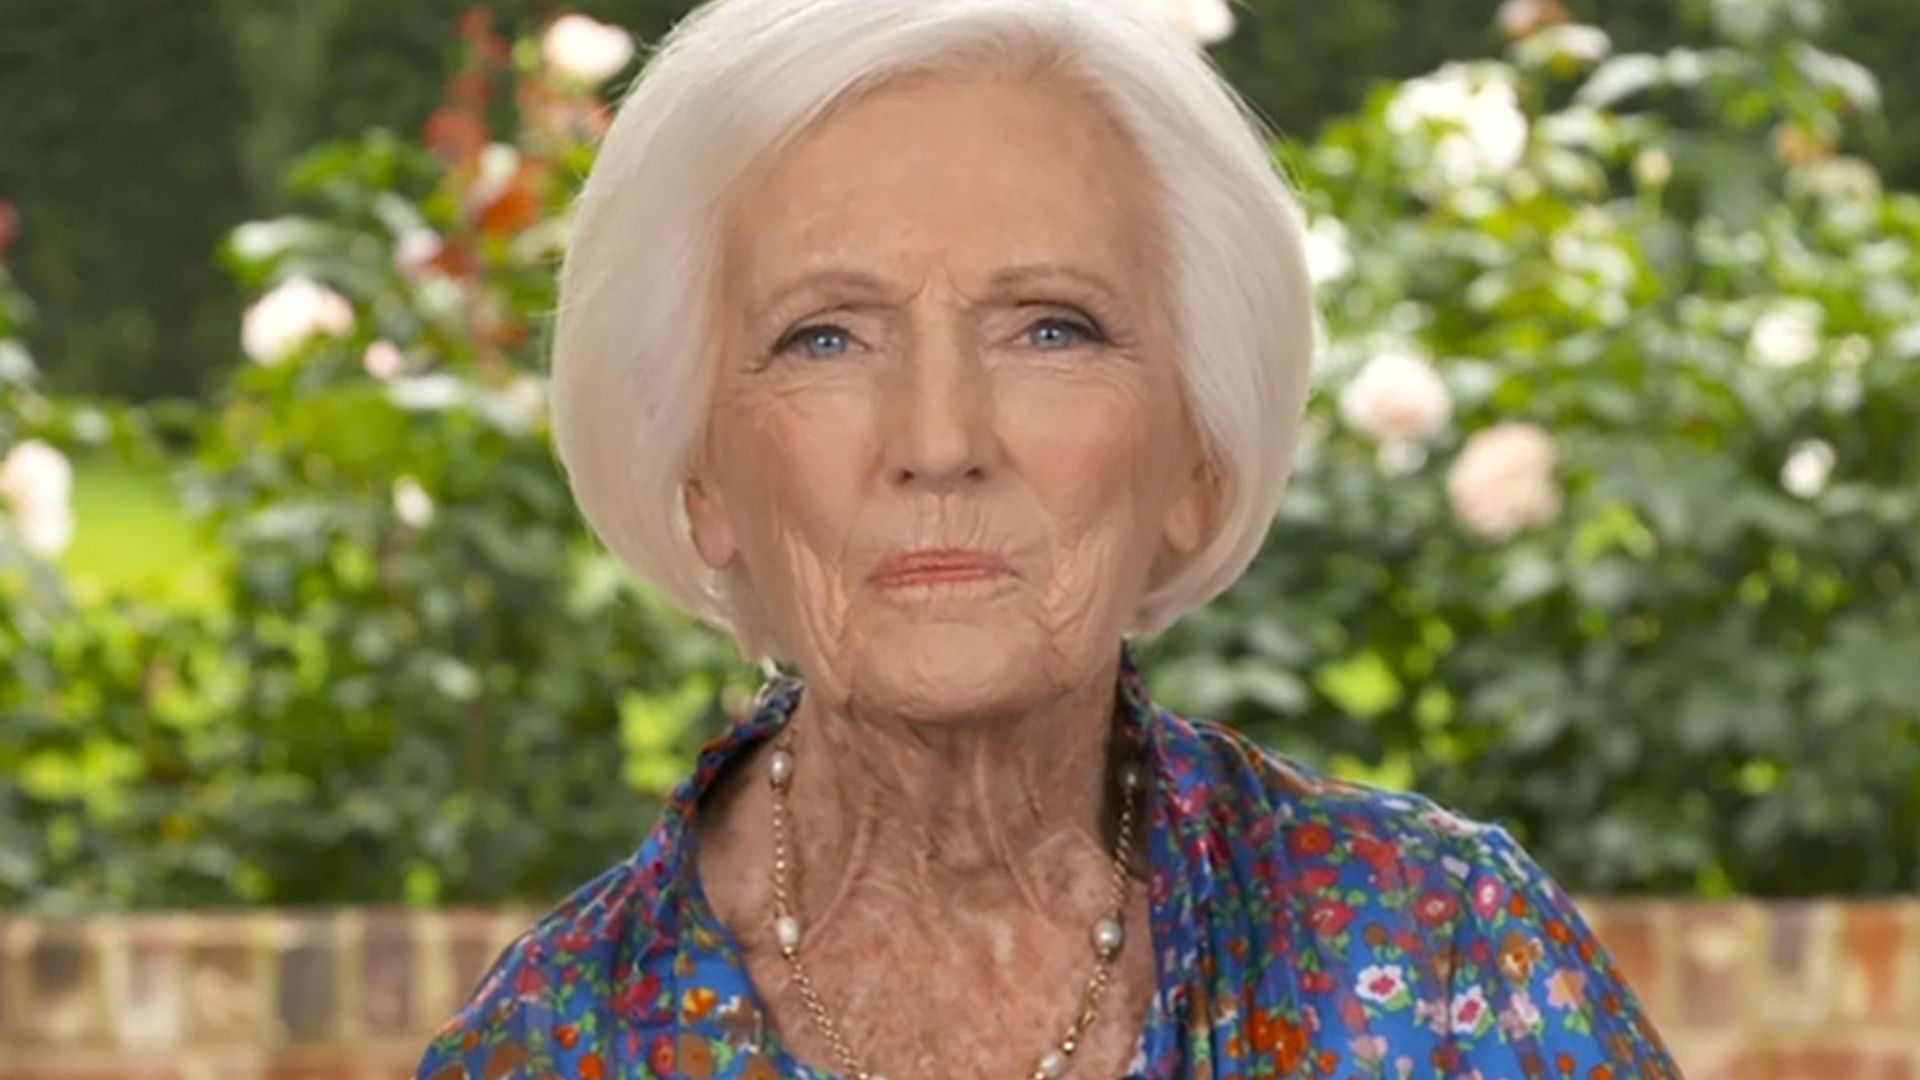 GBBO's Mary Berry reveals she spent ten nights in hospital after serious surgery